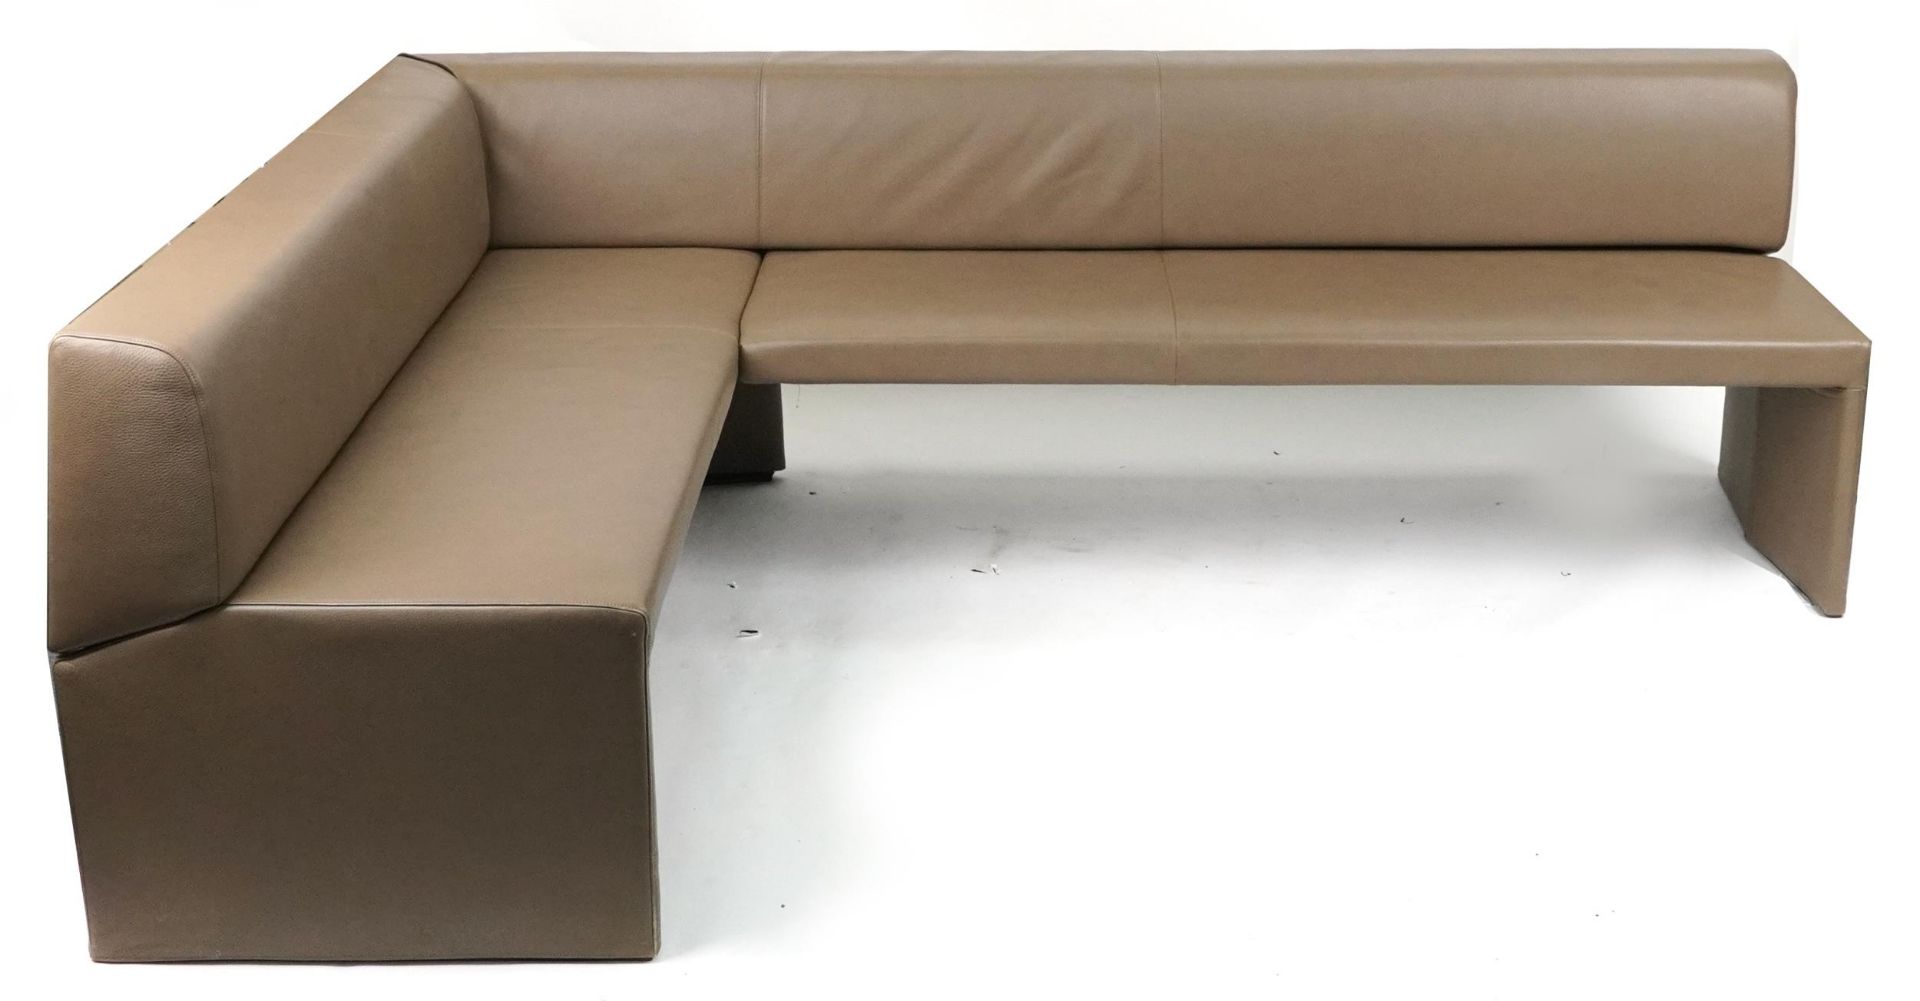 Contemporary Walter Knoll 290 corner seat bench settee with caffe latte leather upholstery, 77cm H x - Image 2 of 7